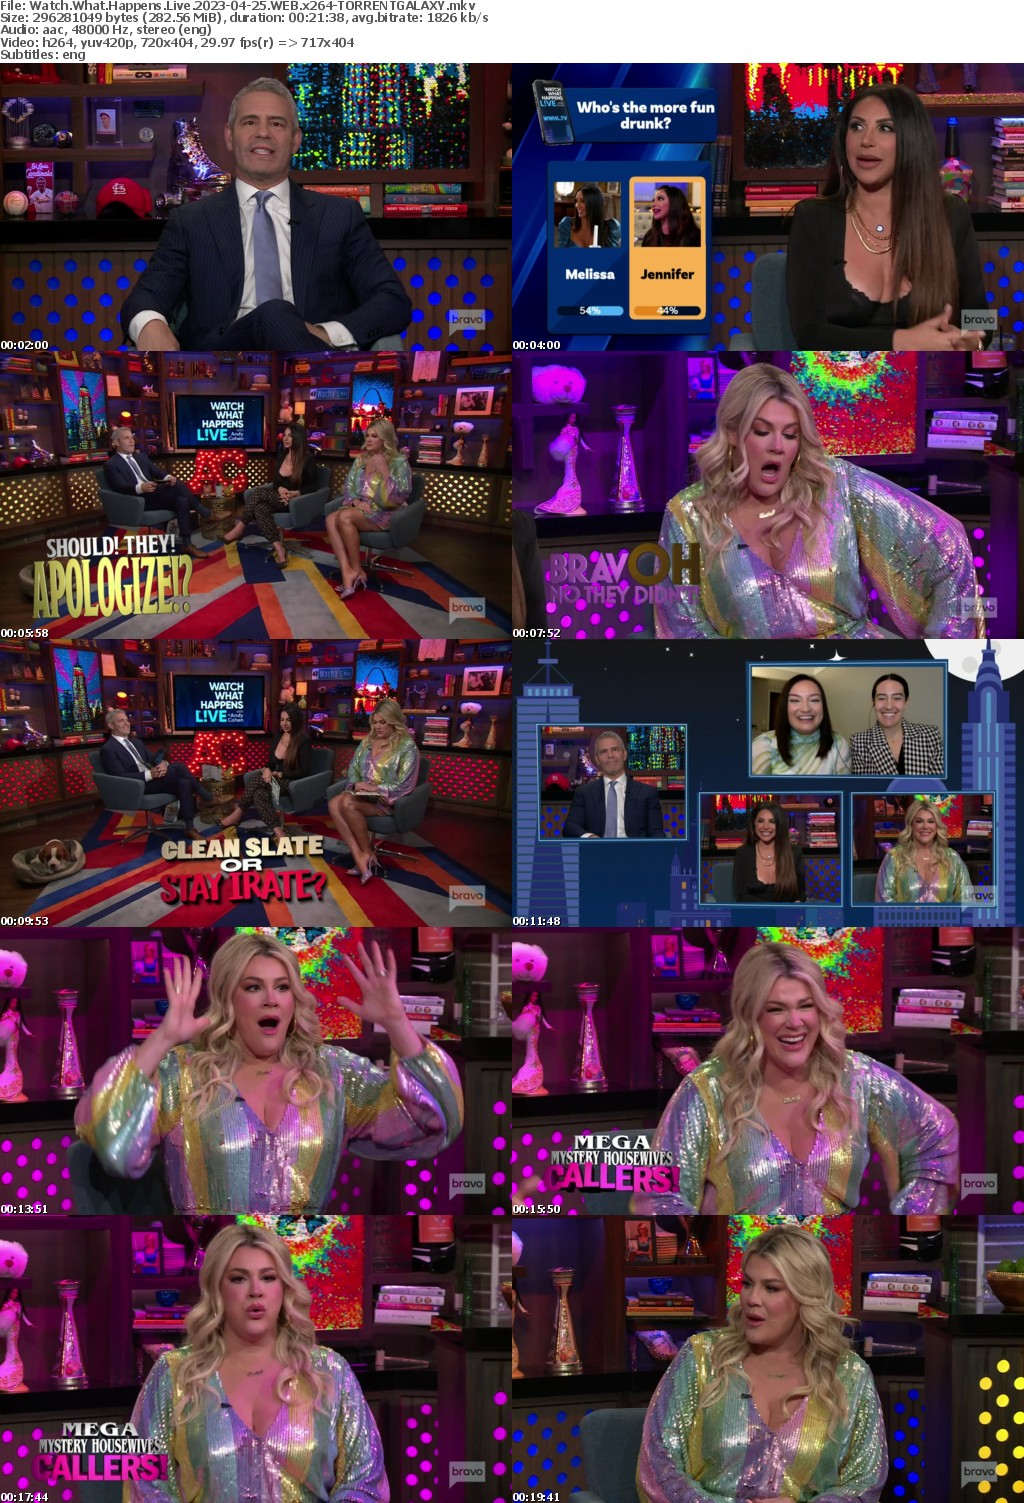 Watch What Happens Live 2023-04-25 WEB x264-GALAXY